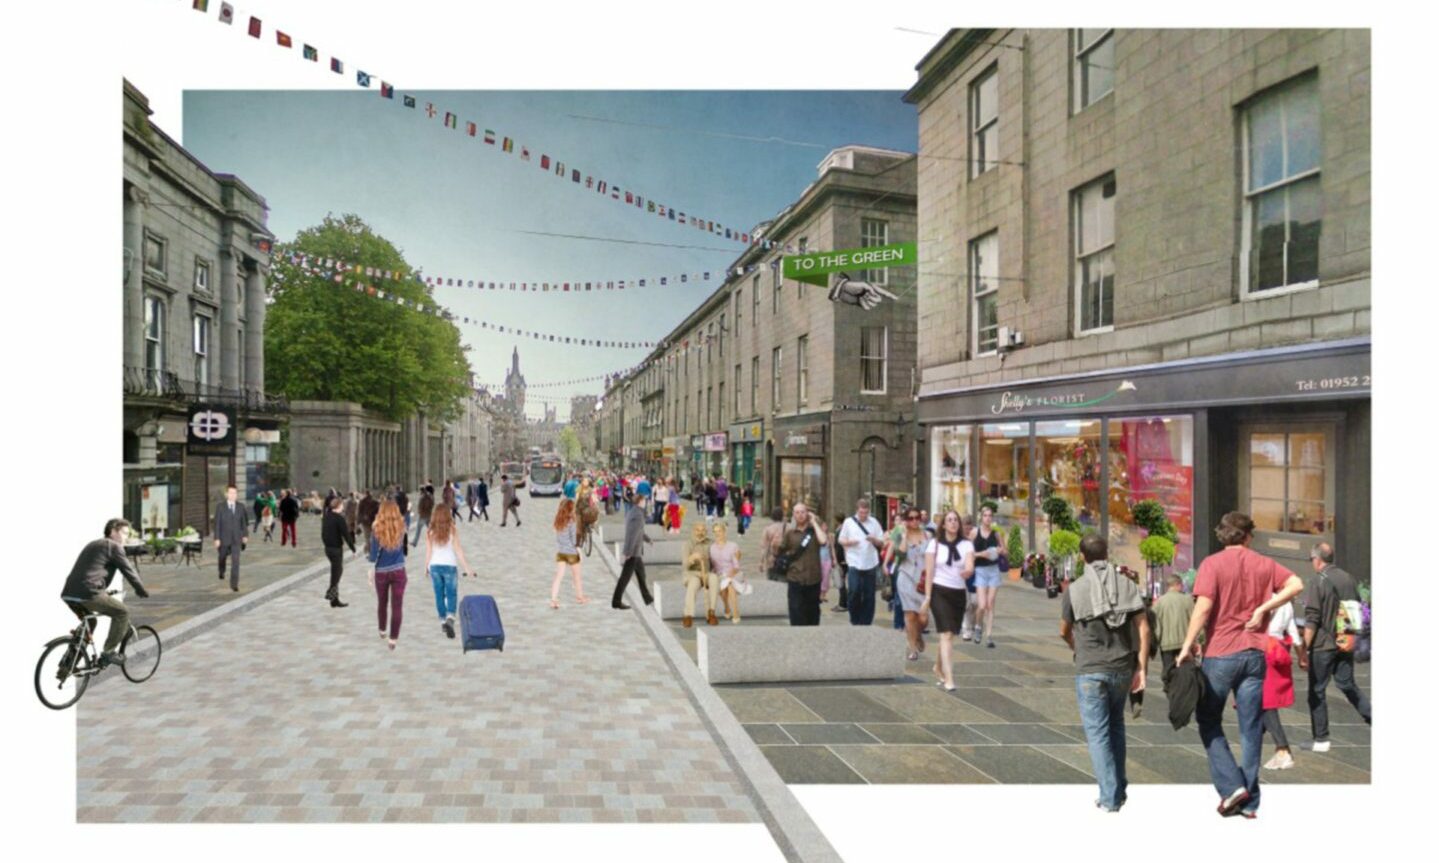 An image from the unanimously-backed 2015 city centre masterplan, which highlighted Union Street pedestrianisation as a council goal. Picture by Aberdeen City Council. CITY MASTER PLAN ARTIST IMPRESSION